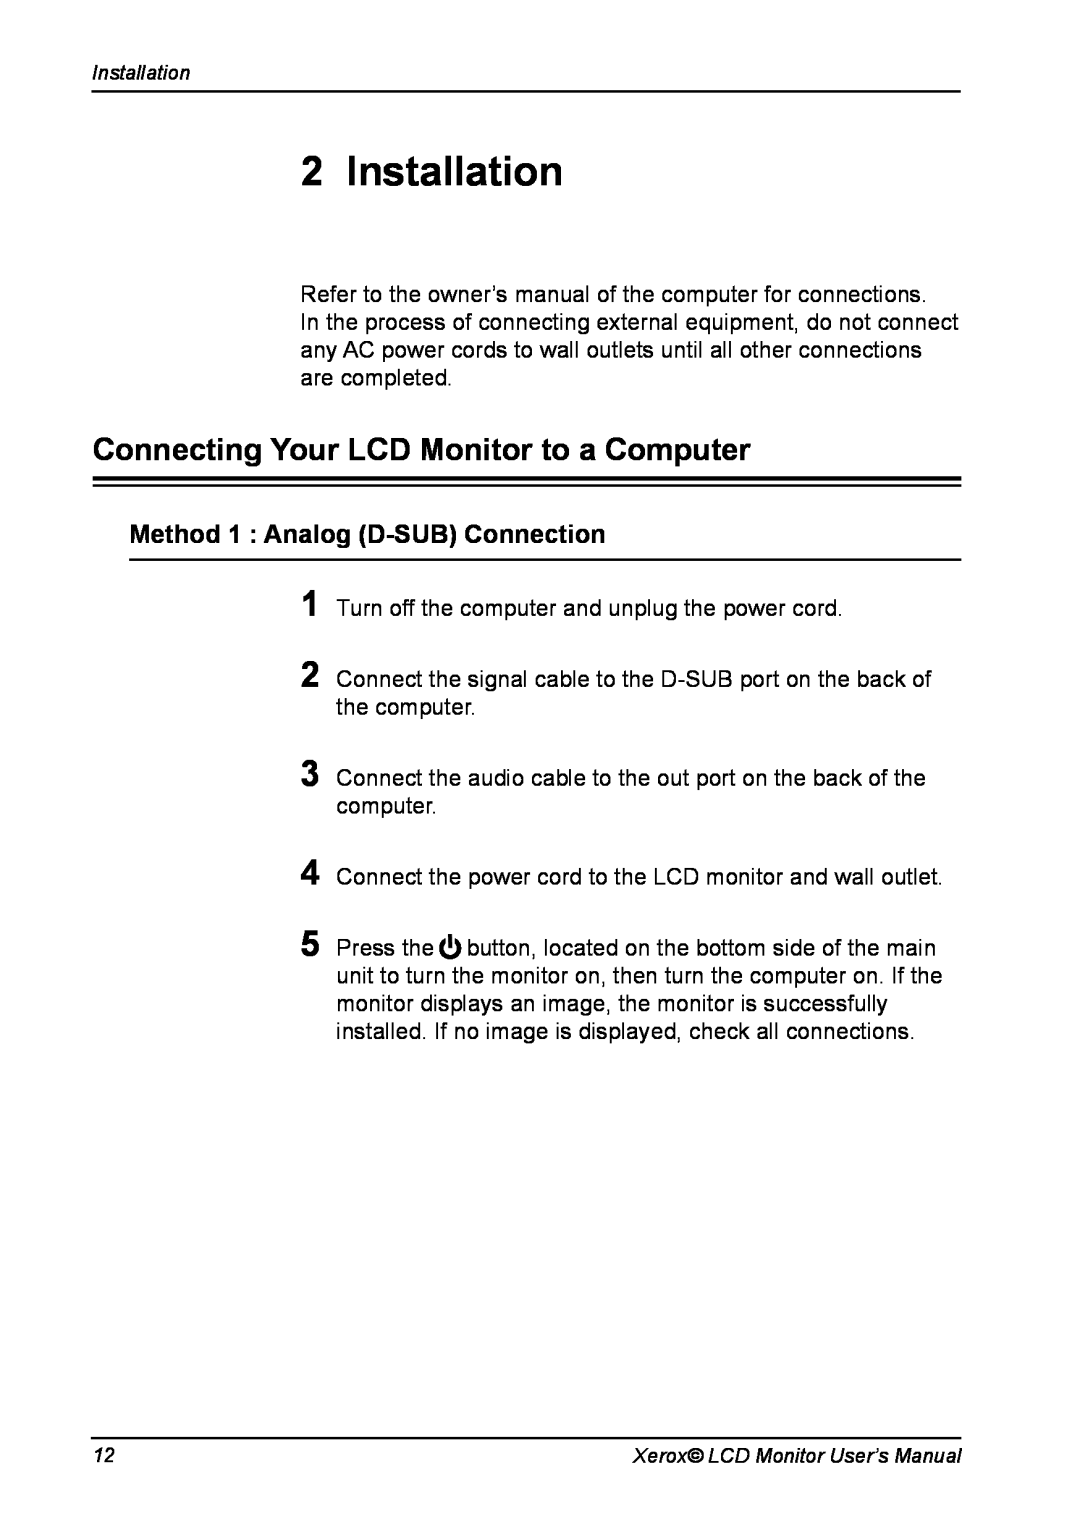 Xerox XM7-19w manual Installation, Connecting Your LCD Monitor to a Computer, Method 1 Analog D-SUB Connection 